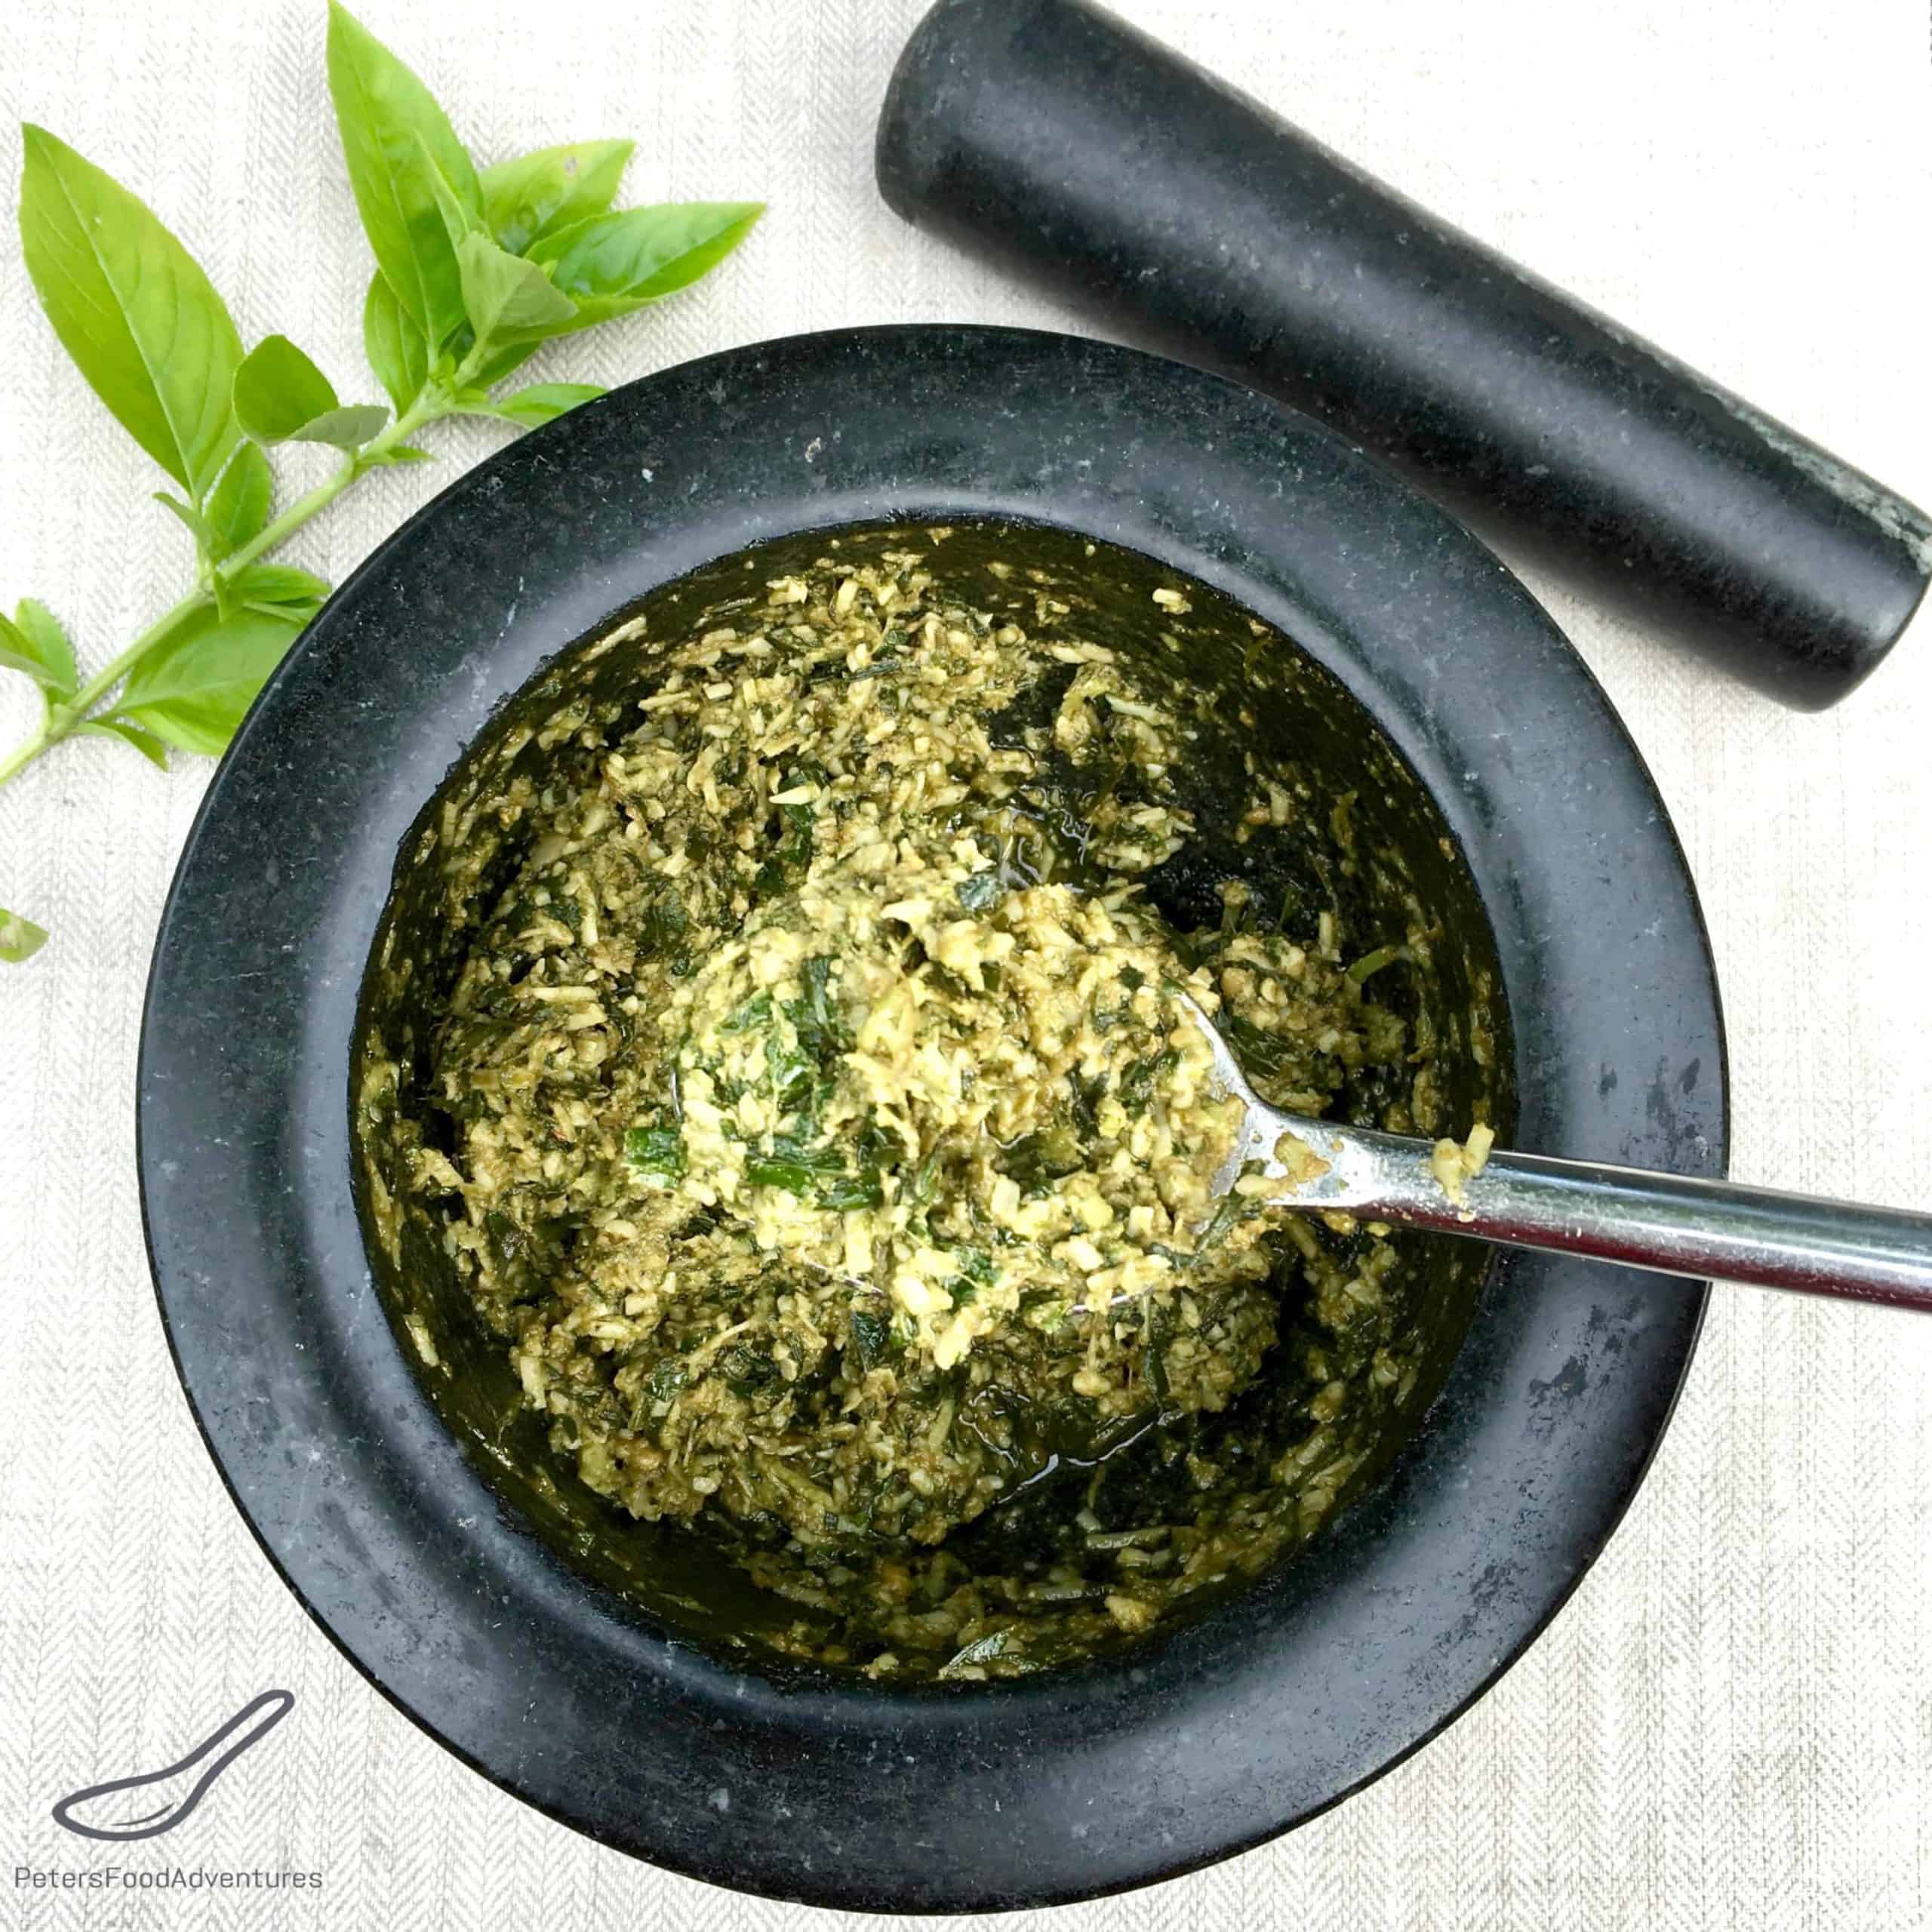 Homemade Pesto in a Mortar and Pestle with fresh basil